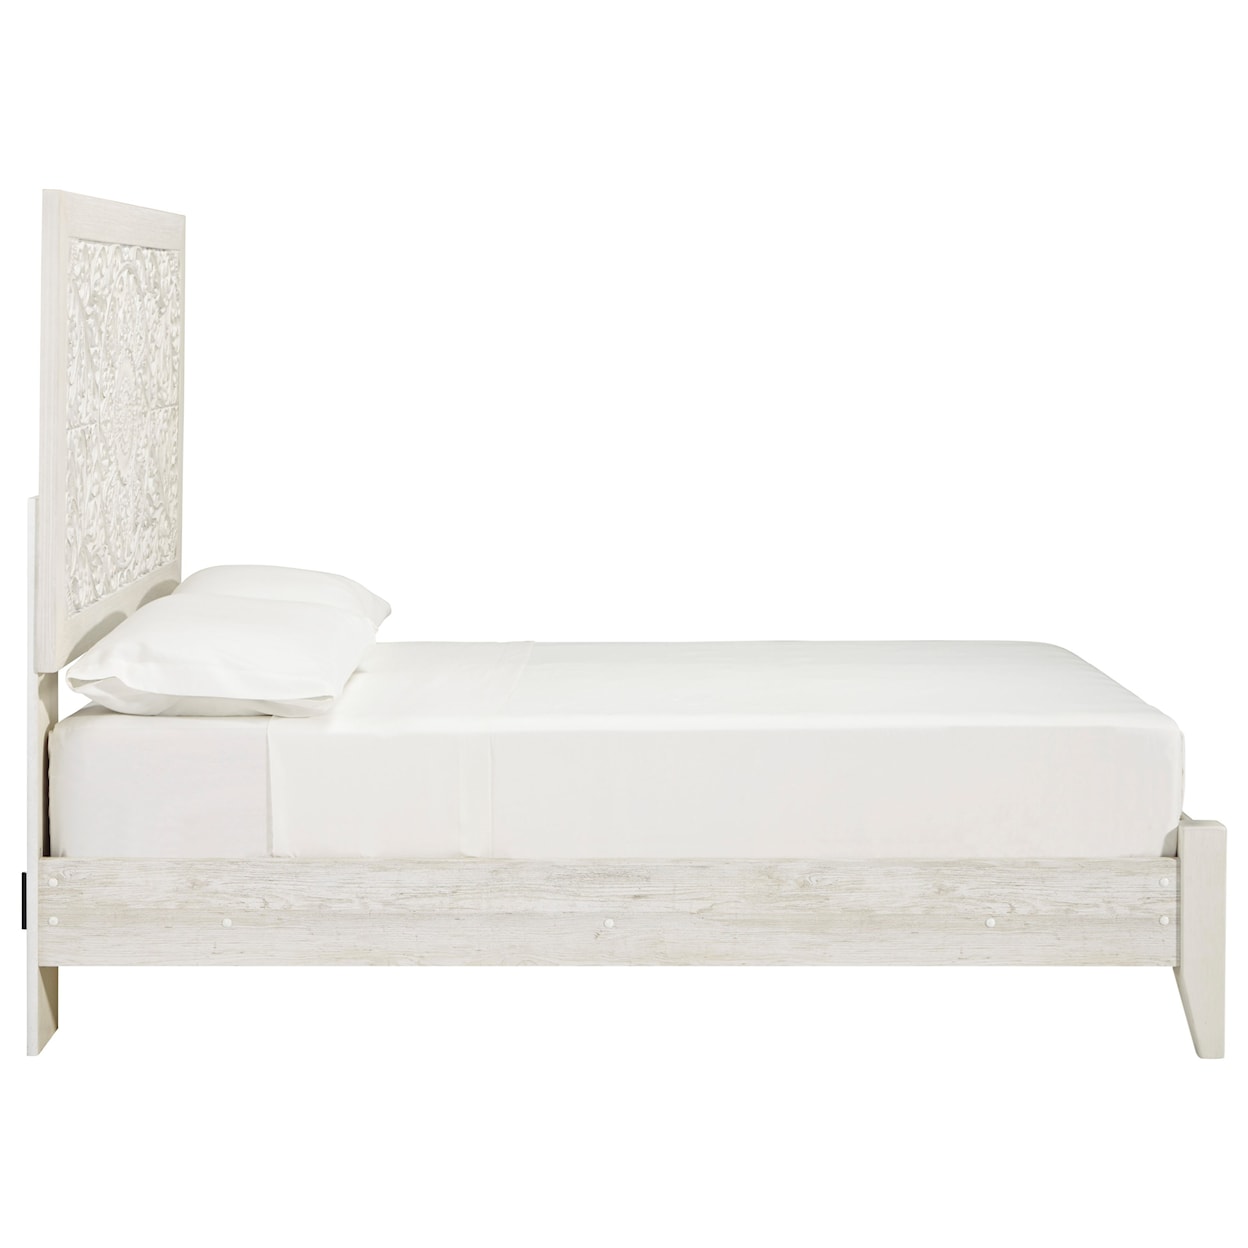 Signature Design Paxberry Full Panel Bed